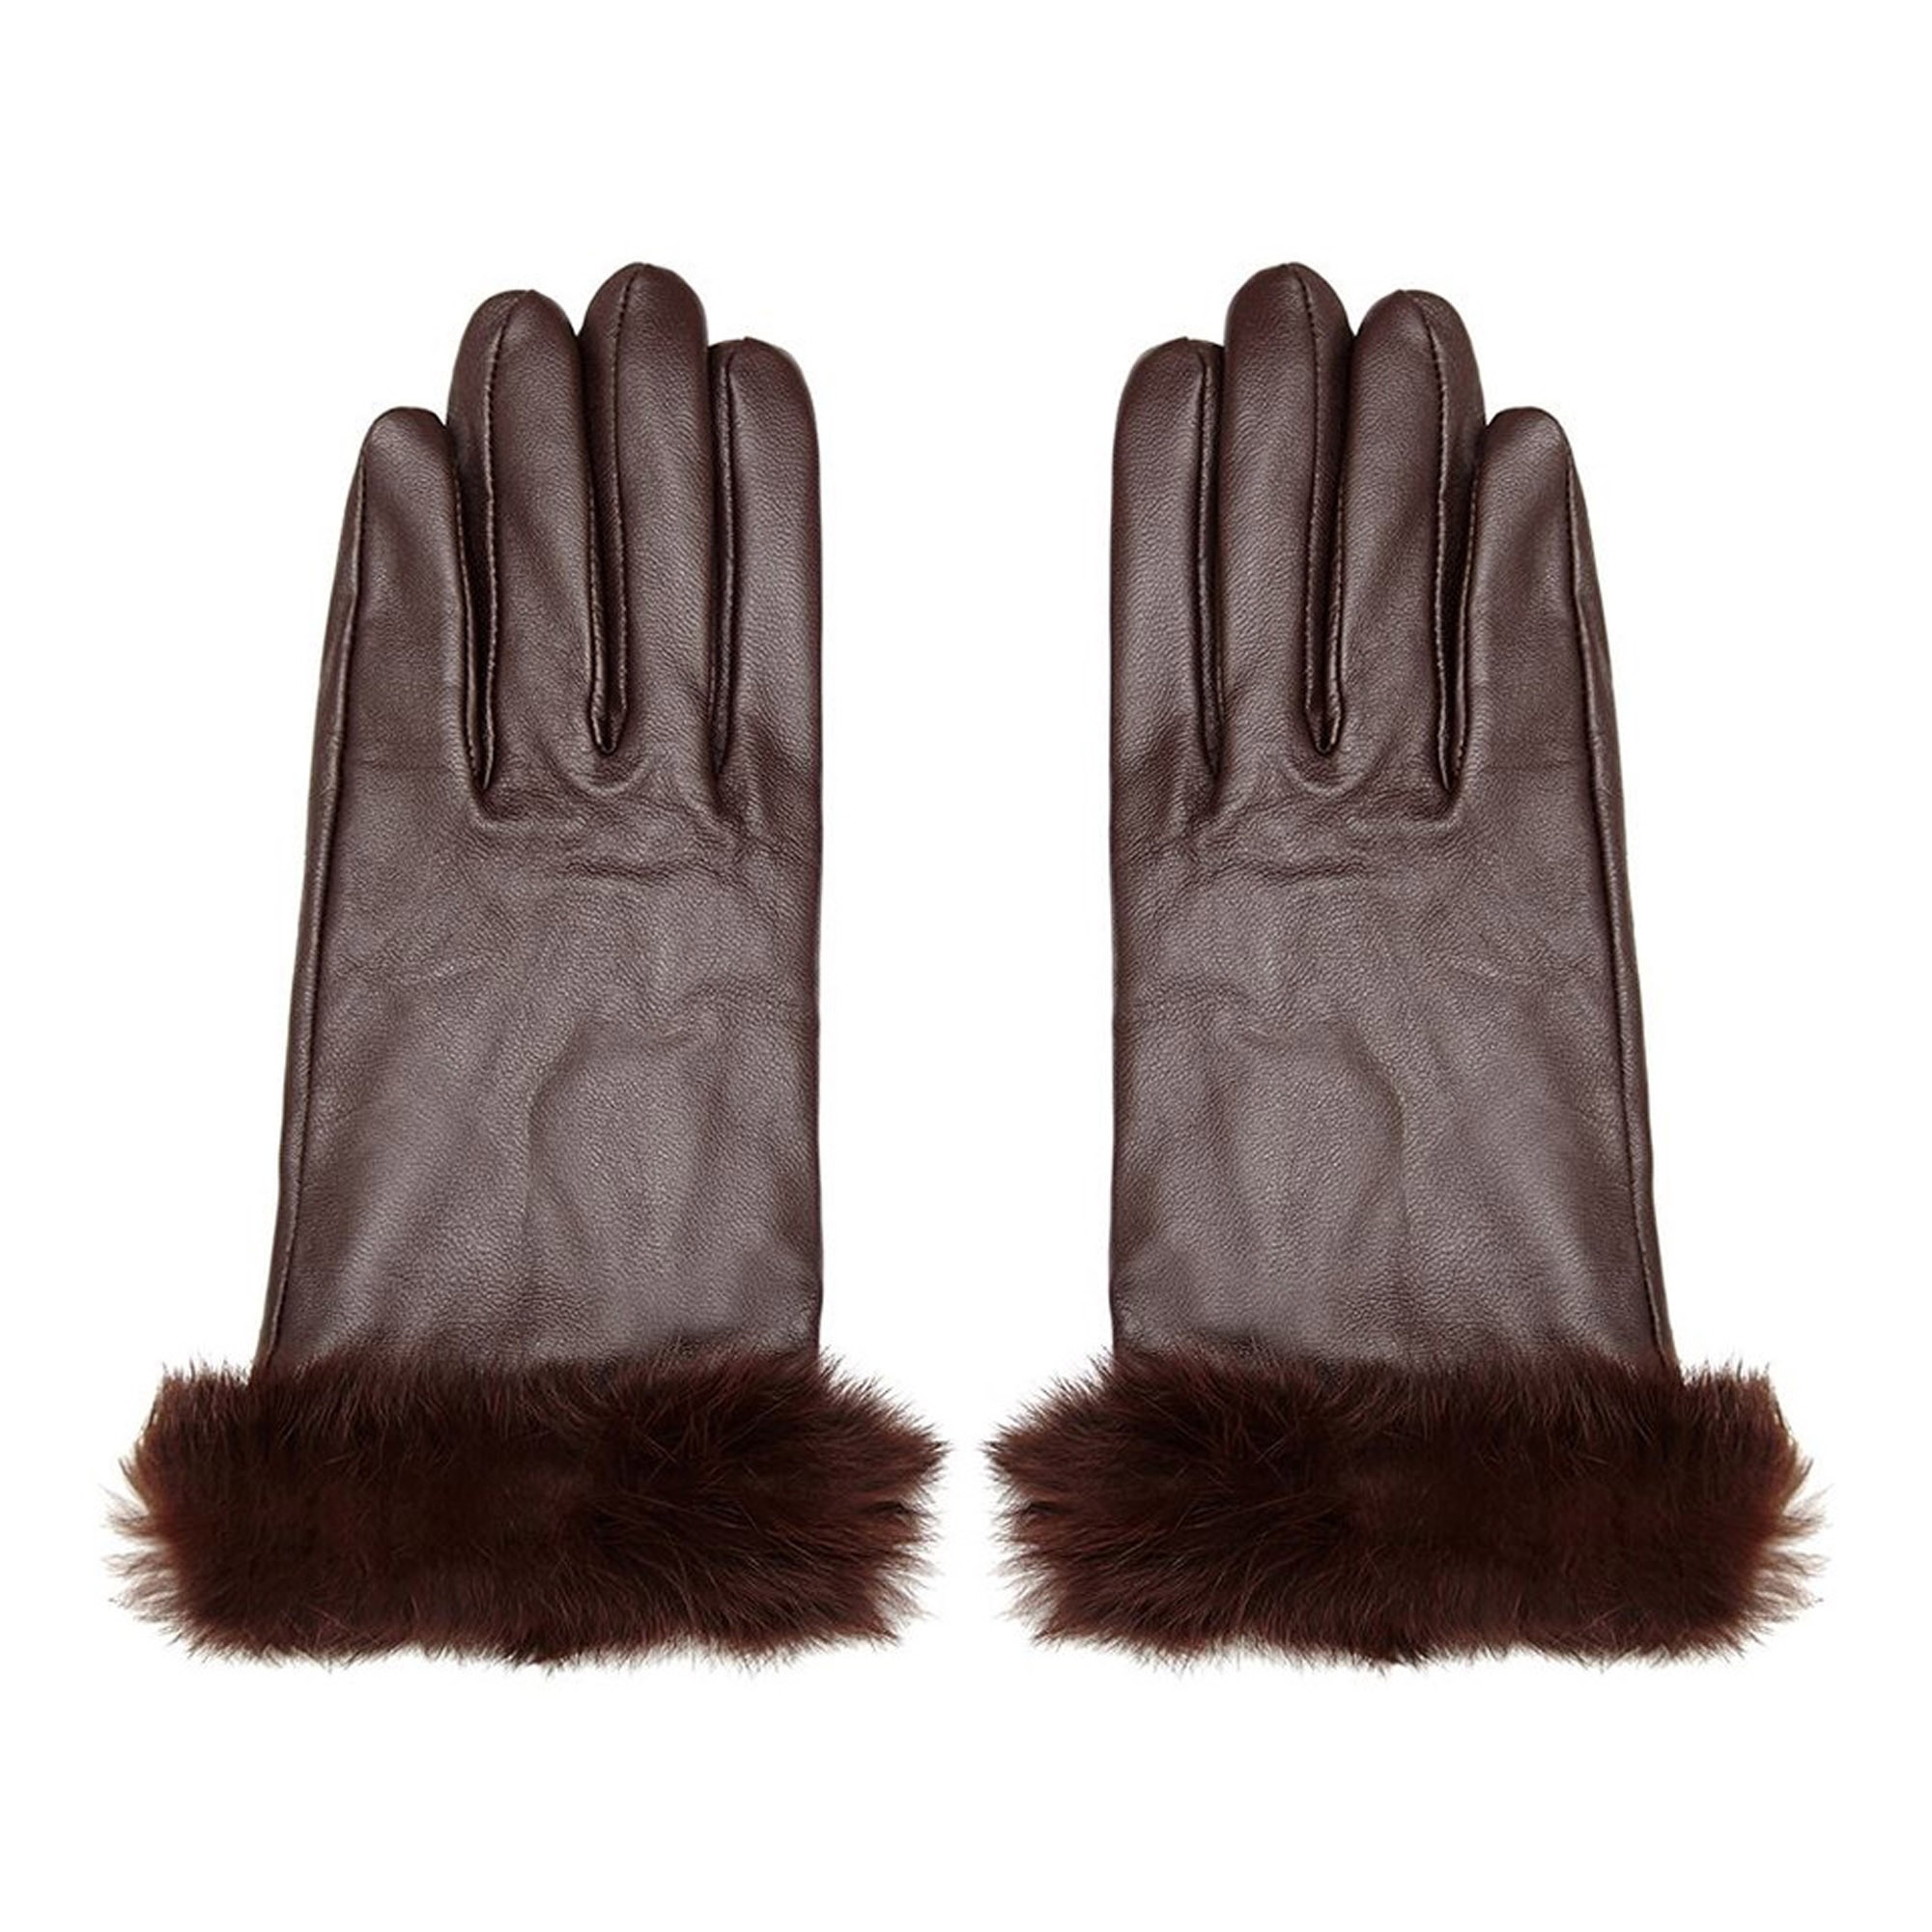 Lona Scott Store, Leather Gloves with fur trim